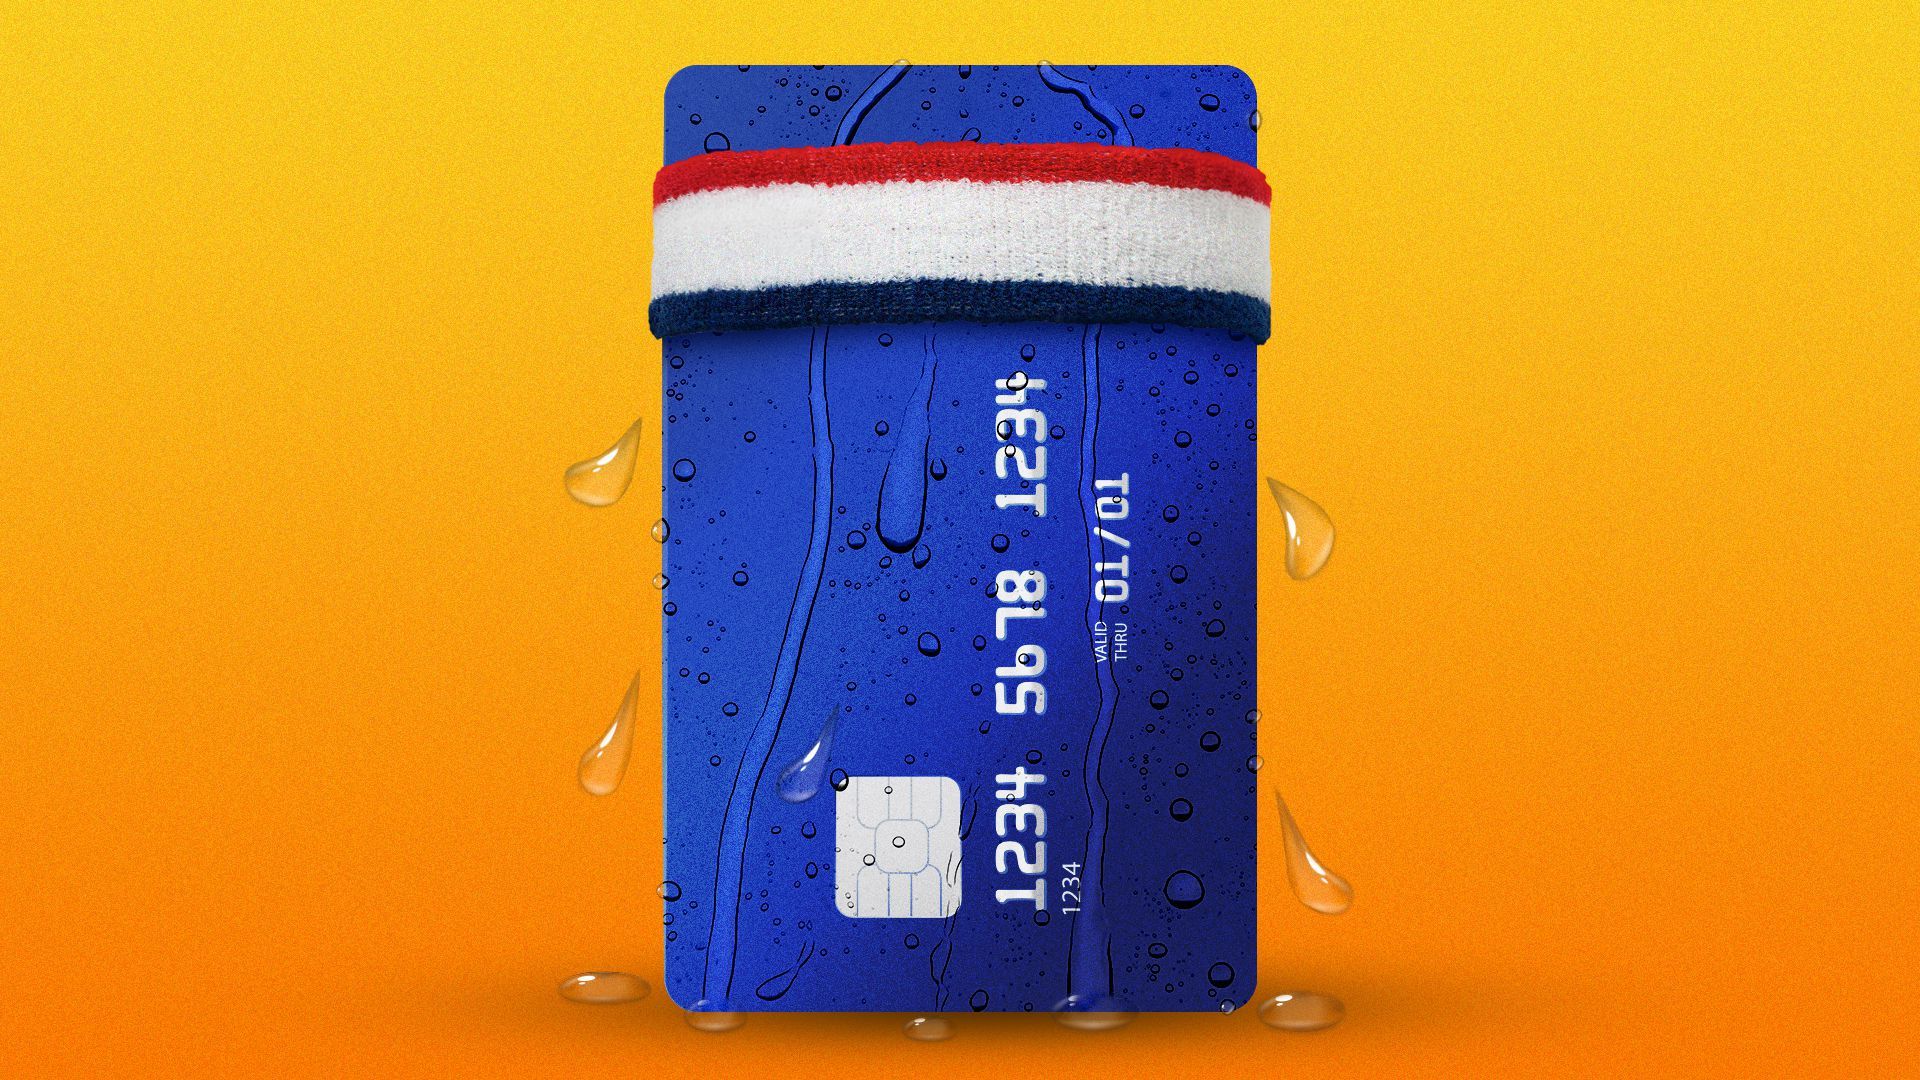 Illustration of a credit card wearing a sweatband and dripping sweat.